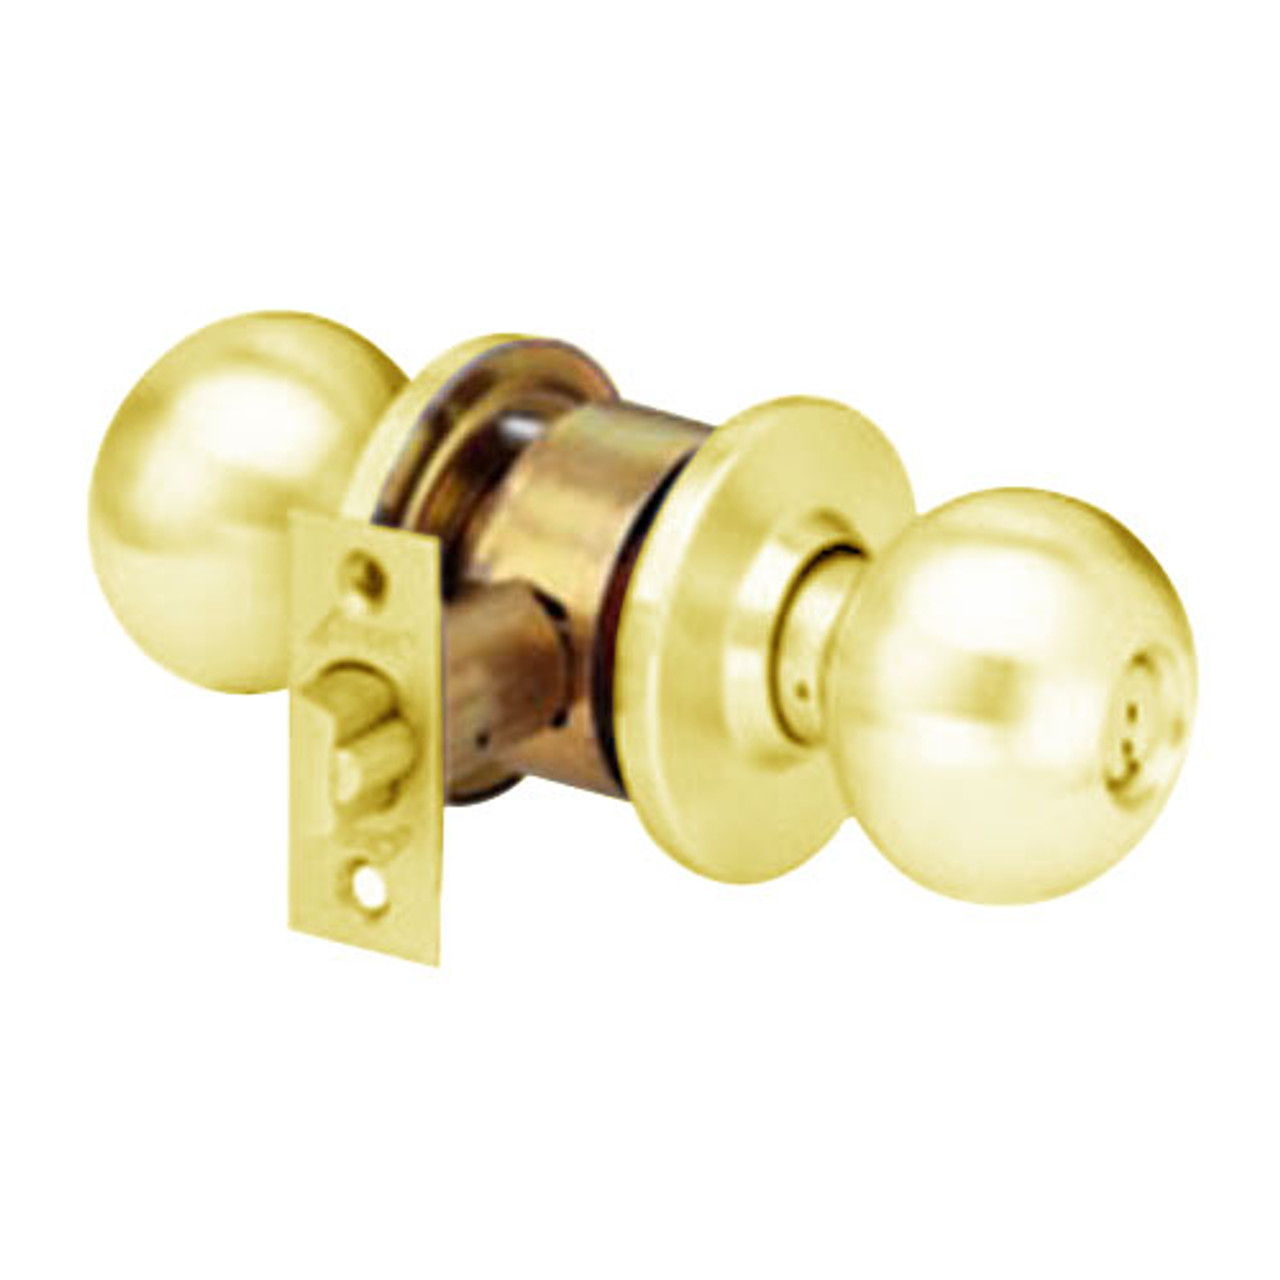 MK14-BD-03 Arrow Lock MK Series Cylindrical Locksets Single Cylinder for Service Station with BD Knob in Bright Brass Finish